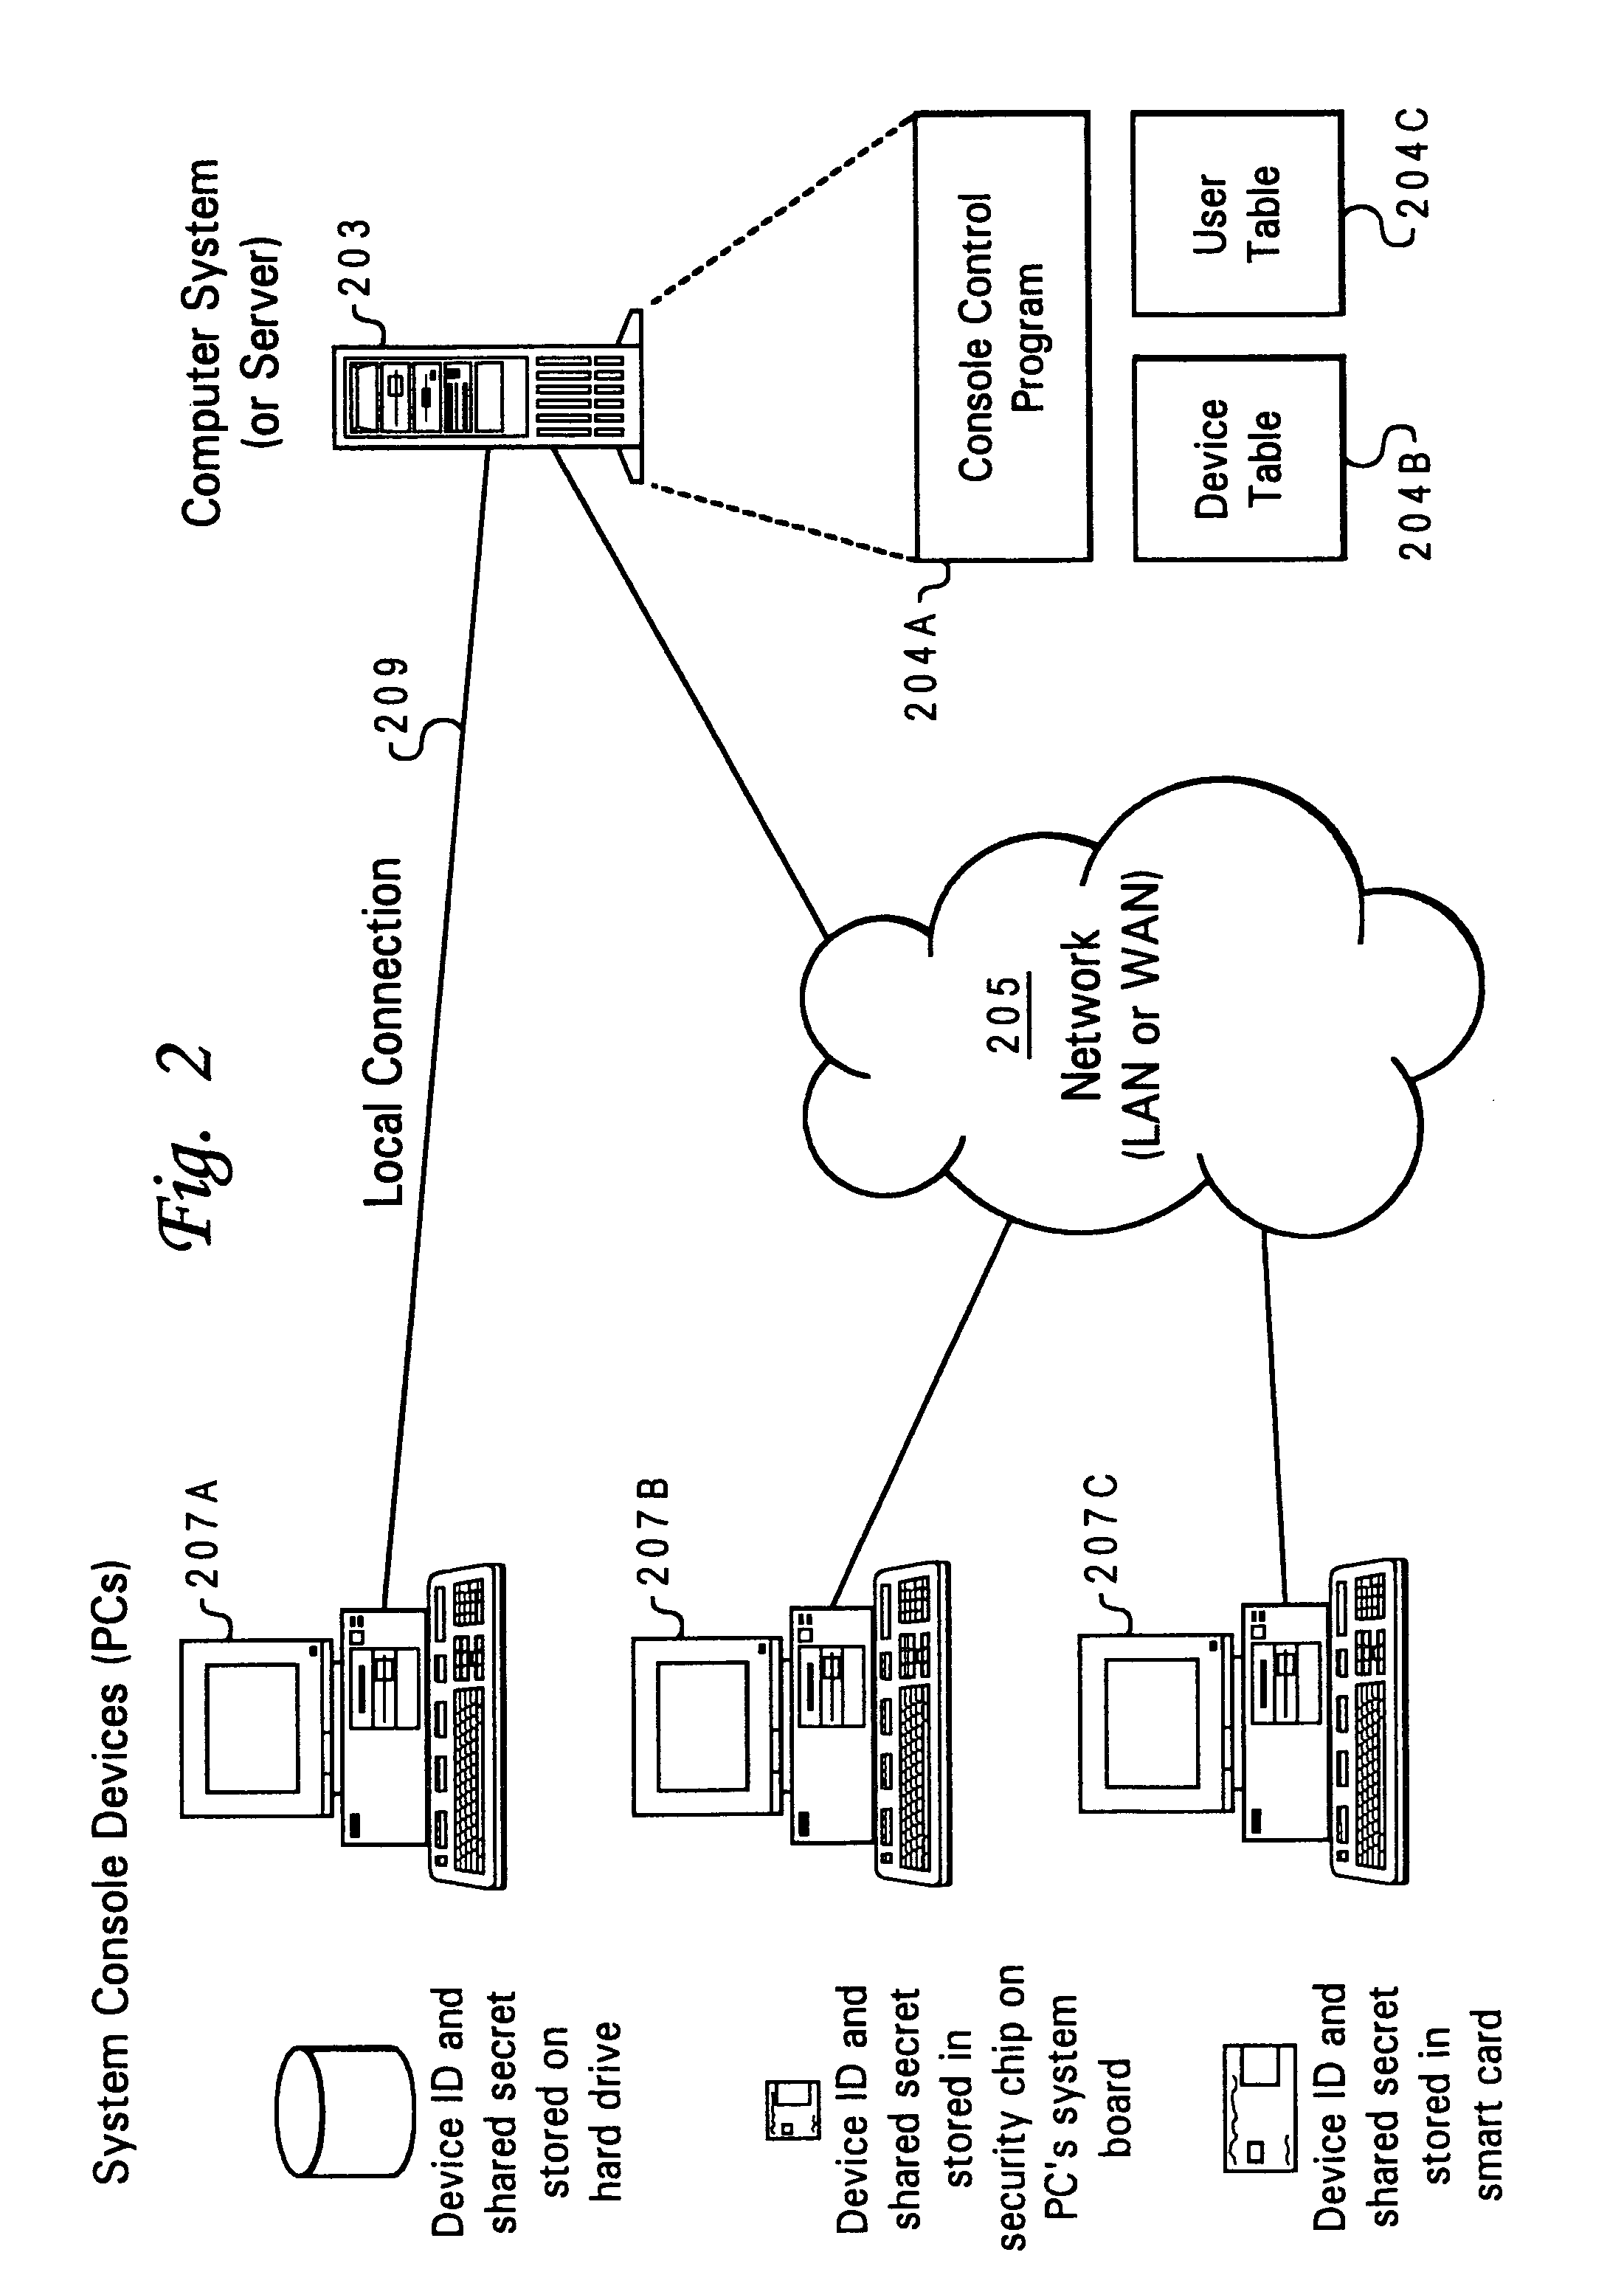 System console device authentication in a network environment